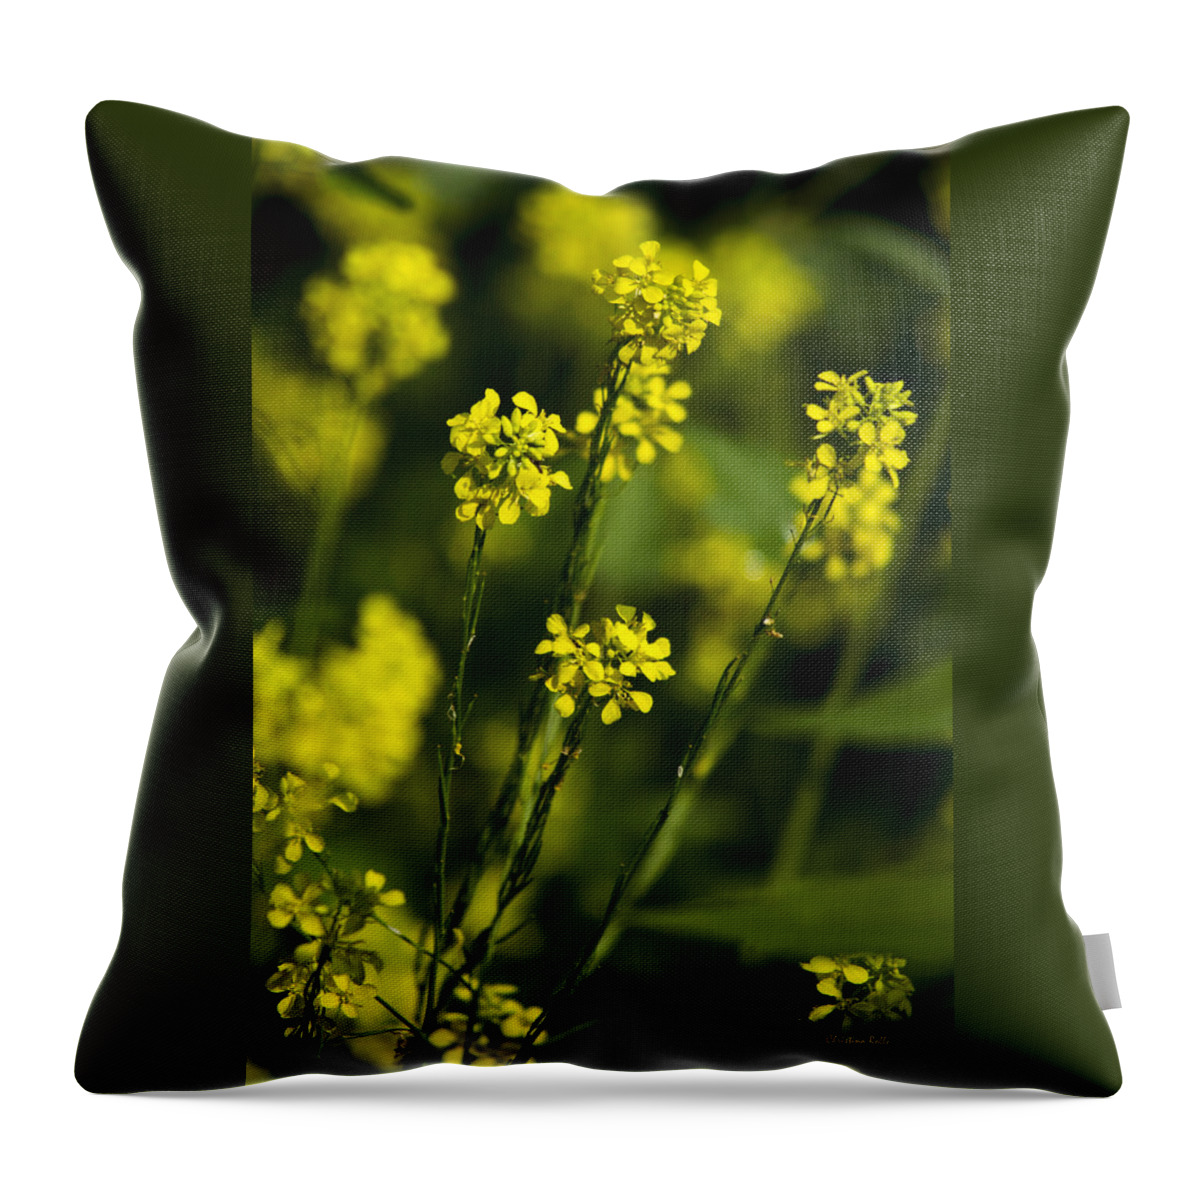 Flowers Throw Pillow featuring the photograph Common Wintercress Flowers by Christina Rollo